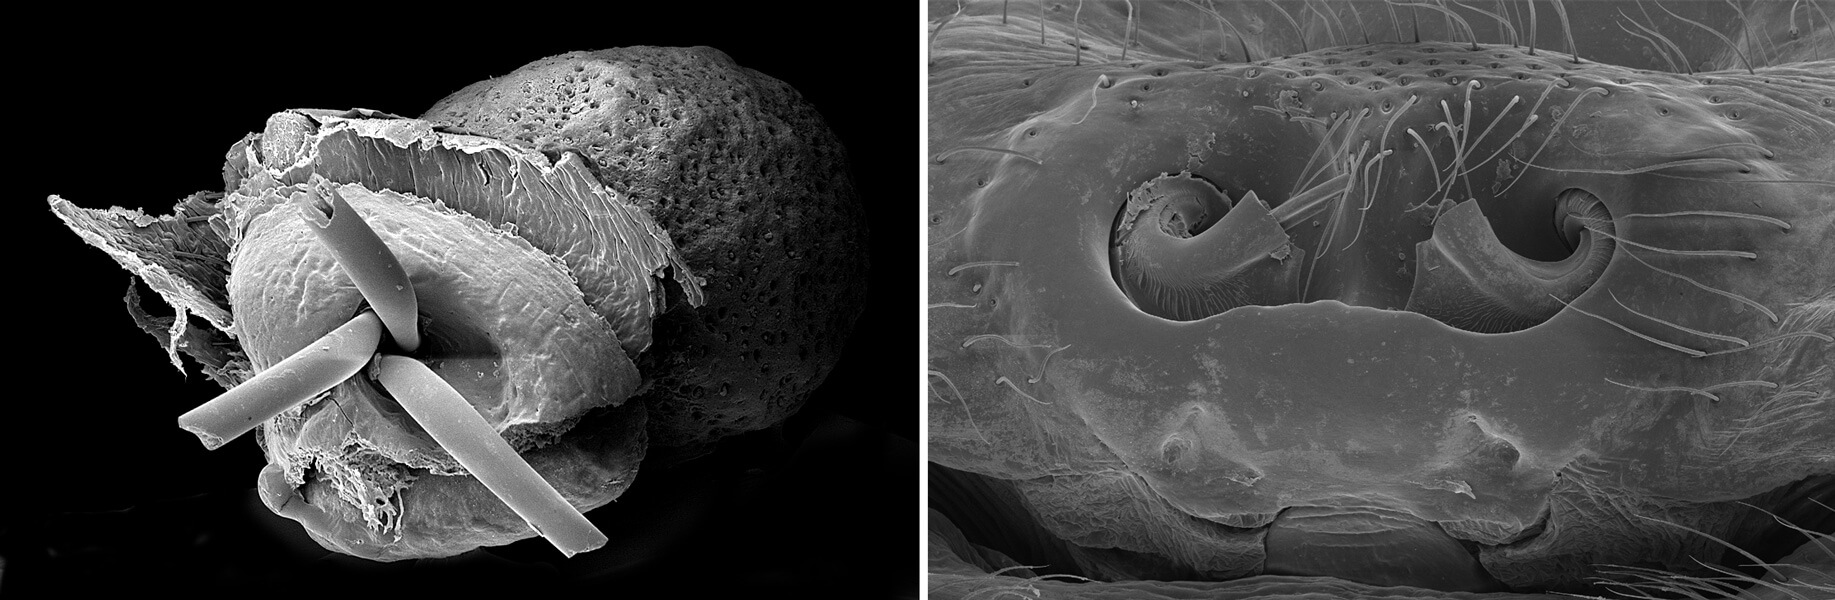 Two scanning electron micrographs of copulatory openings. The image on the left shows one opening plugged with three broken-off appendages. The image on the right shows two curved copulatory openings with many thin filaments protruding from them.